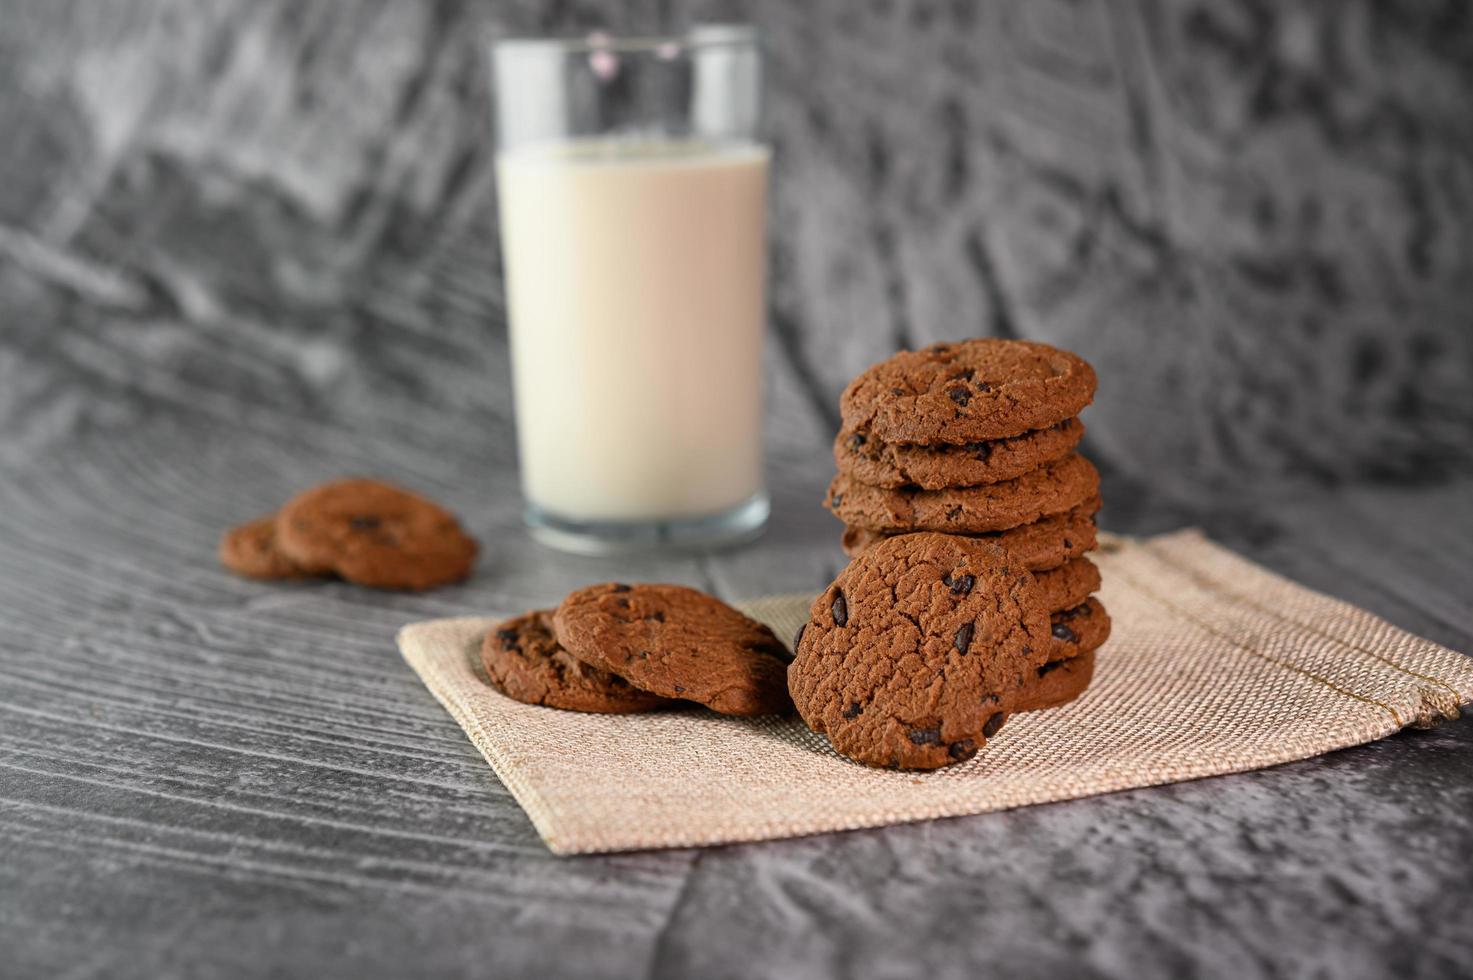 Cookies and a glass of milk on a cloth photo